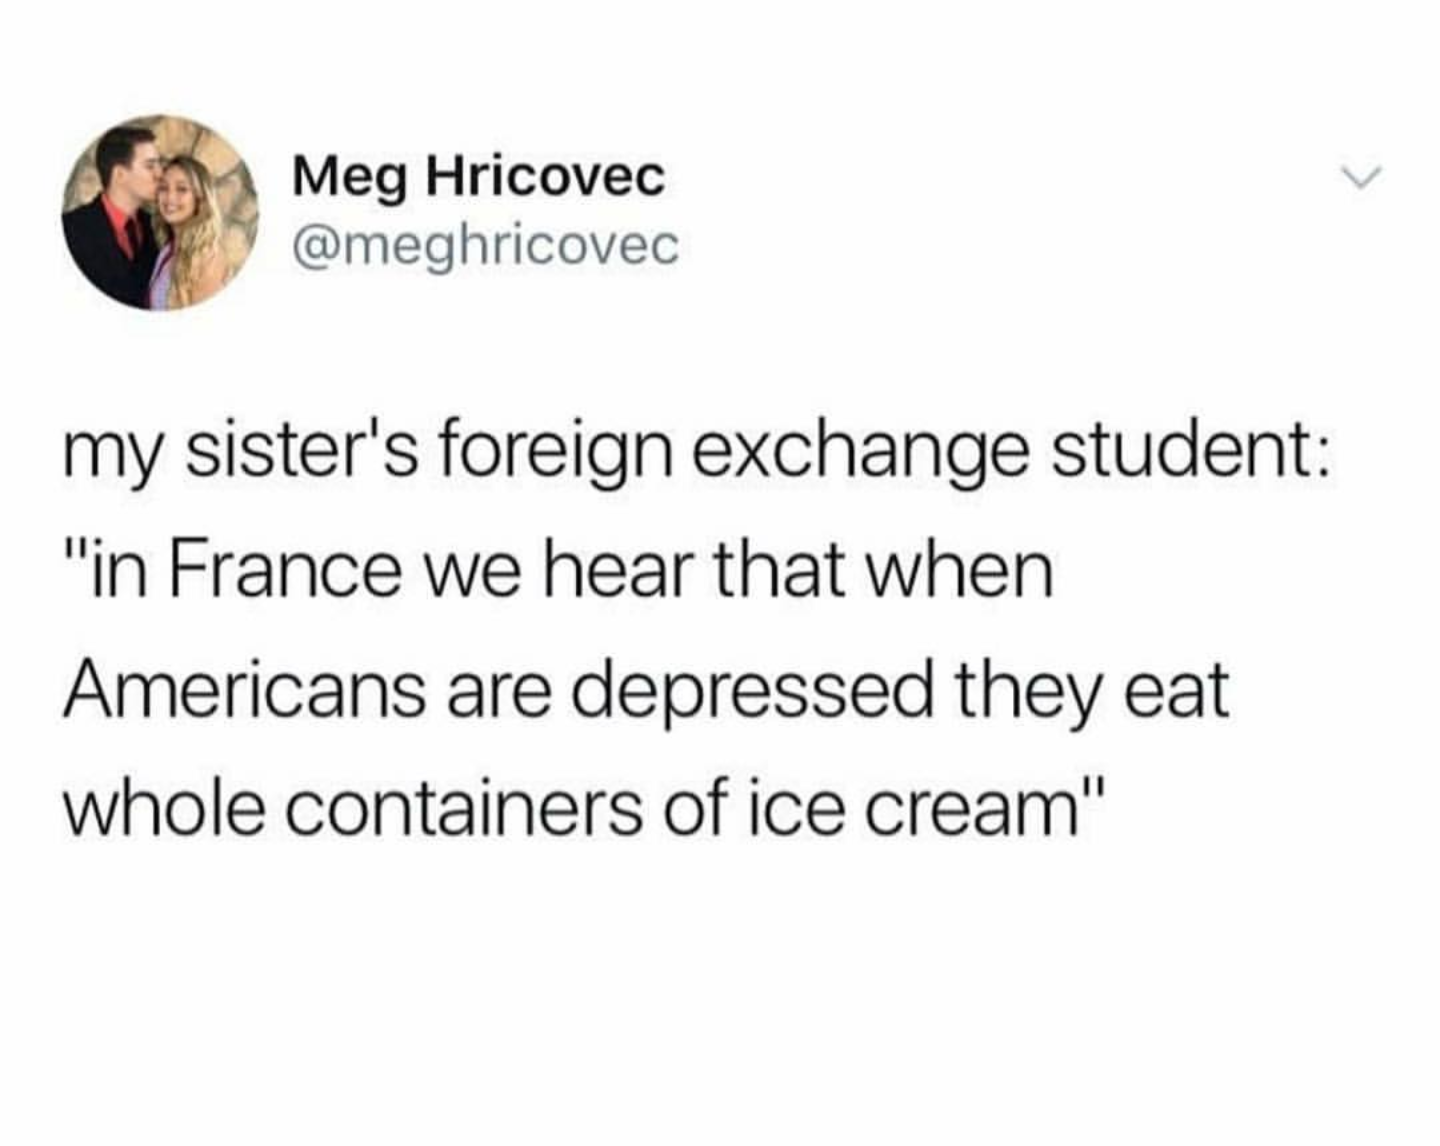 Meg Hricovec my sister's foreign exchange student "in France we hear that when Americans are depressed they eat whole containers of ice cream"